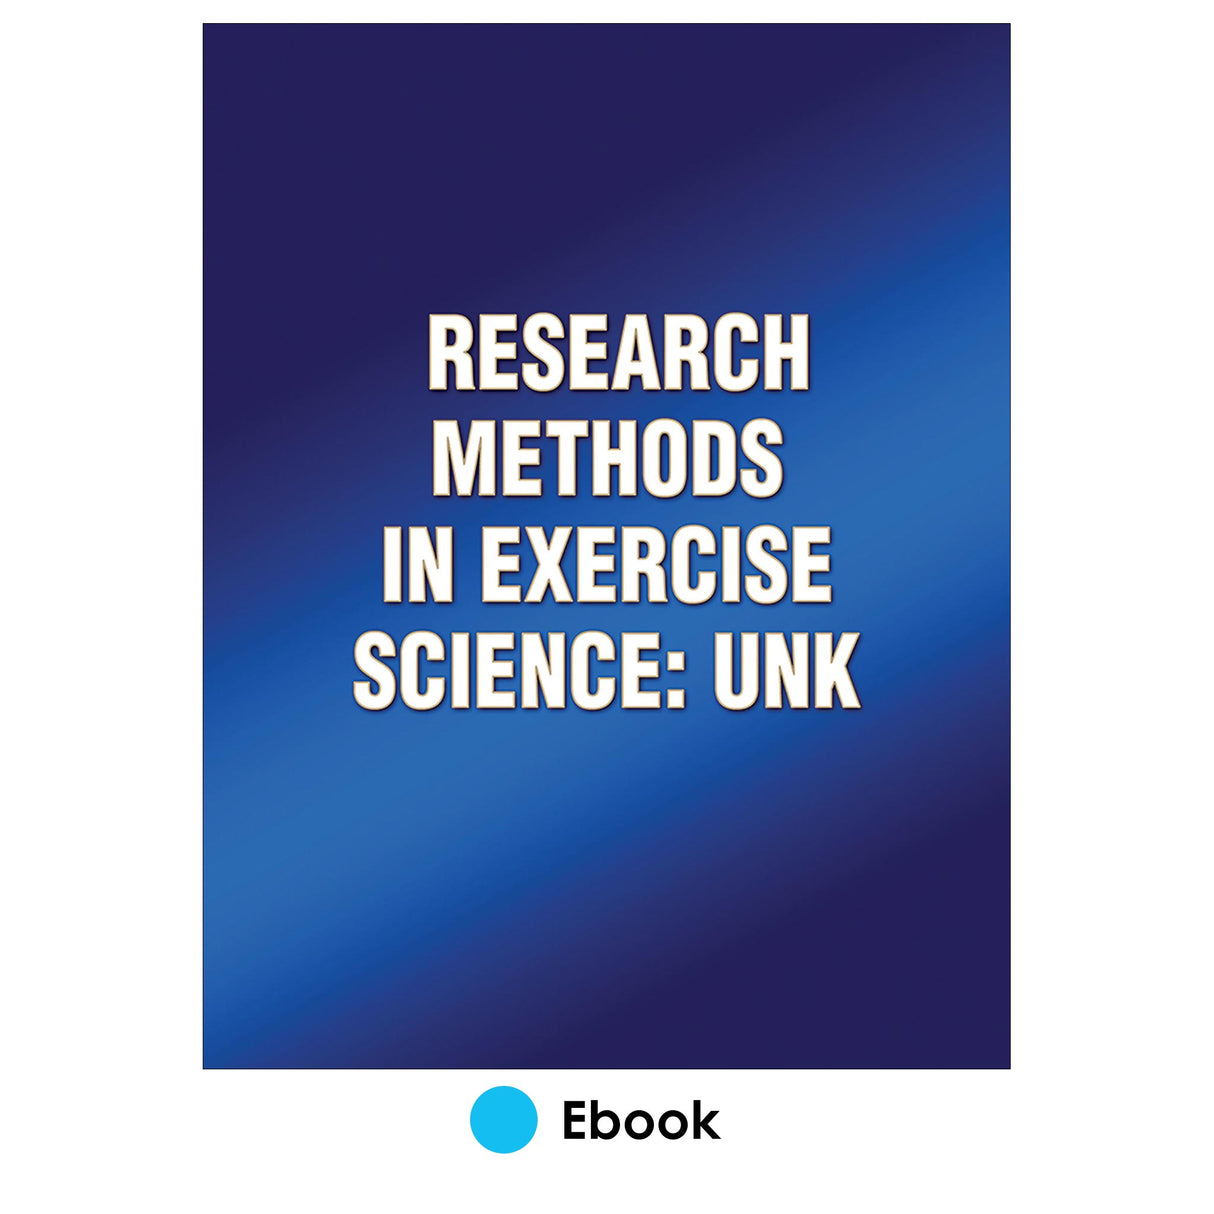 Research Methods in Exercise Science: UNK